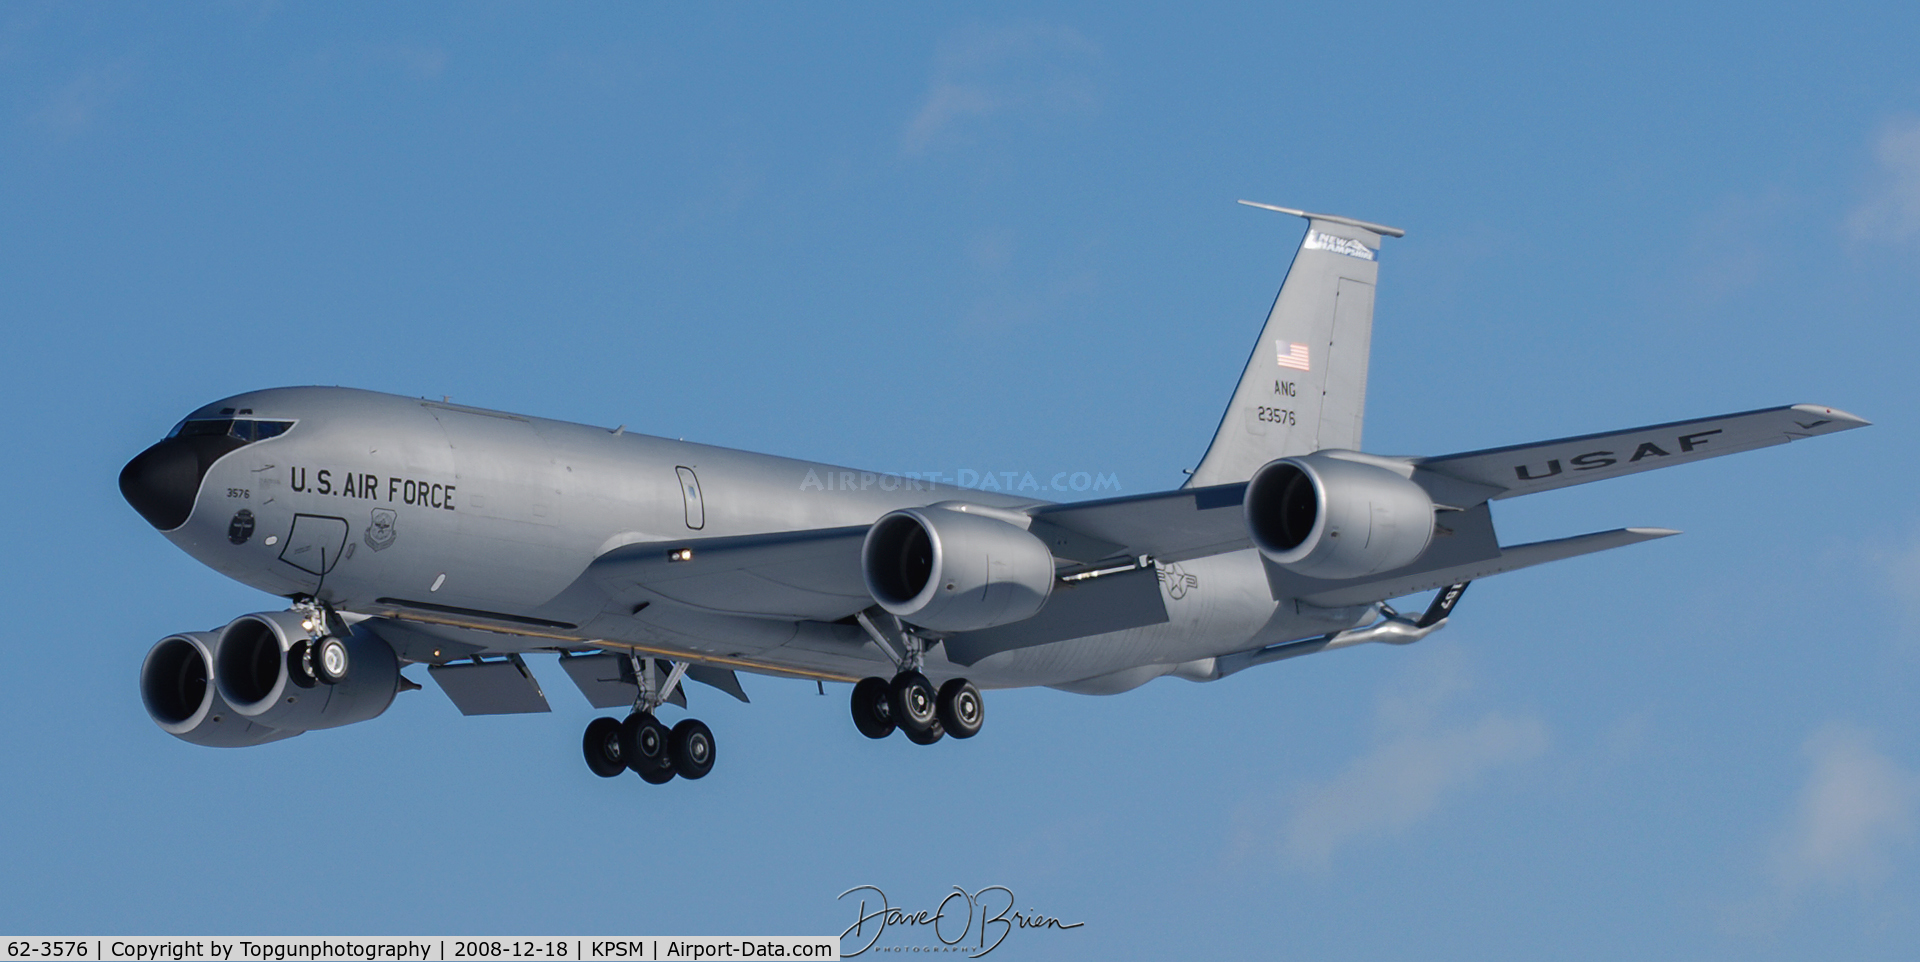 62-3576, 1962 Boeing KC-135R Stratotanker C/N 18559, PACK42 with an IFE, they landed safely